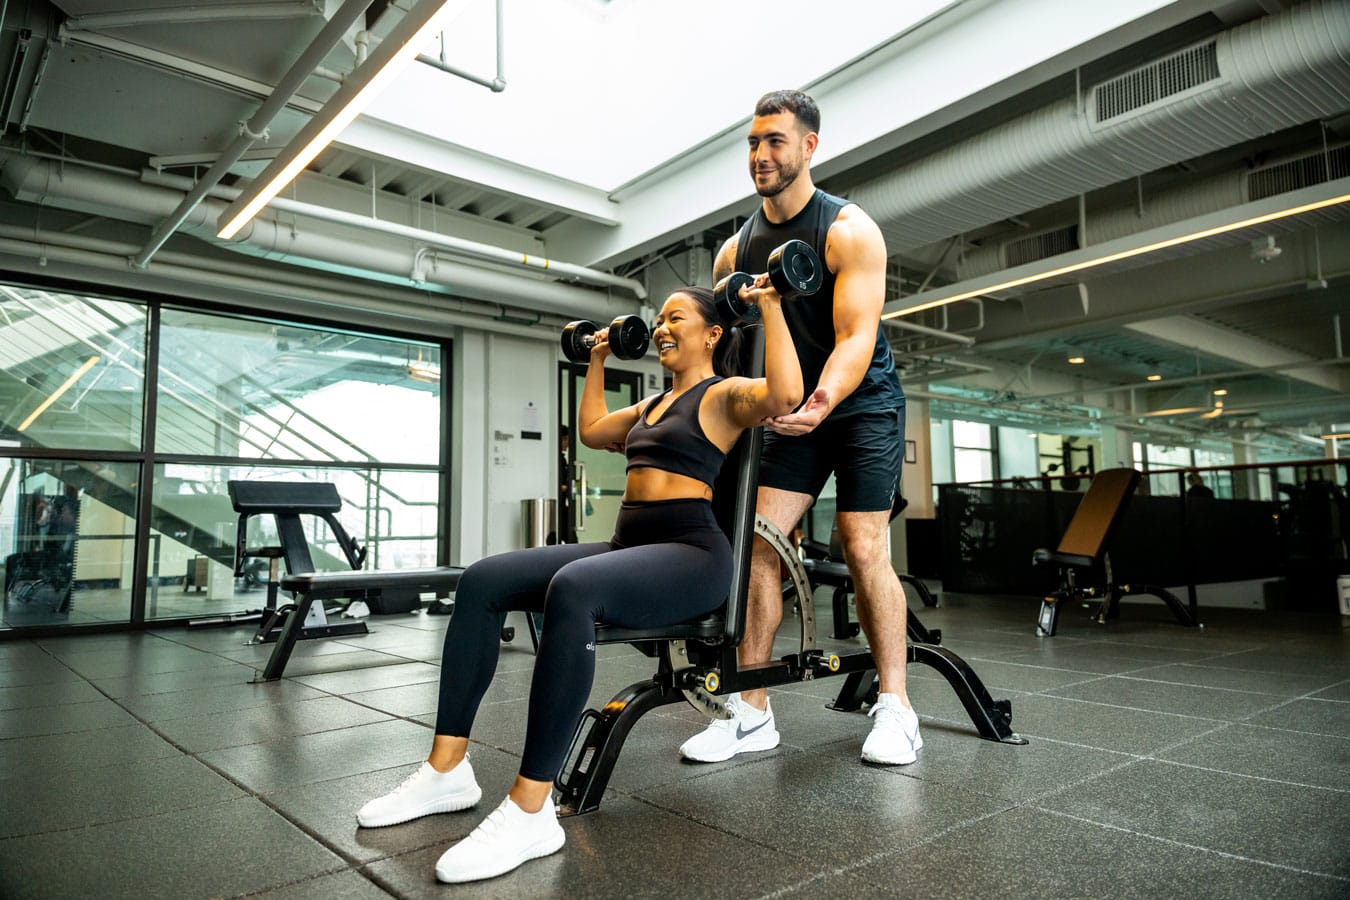 A man and woman working out in a gym.